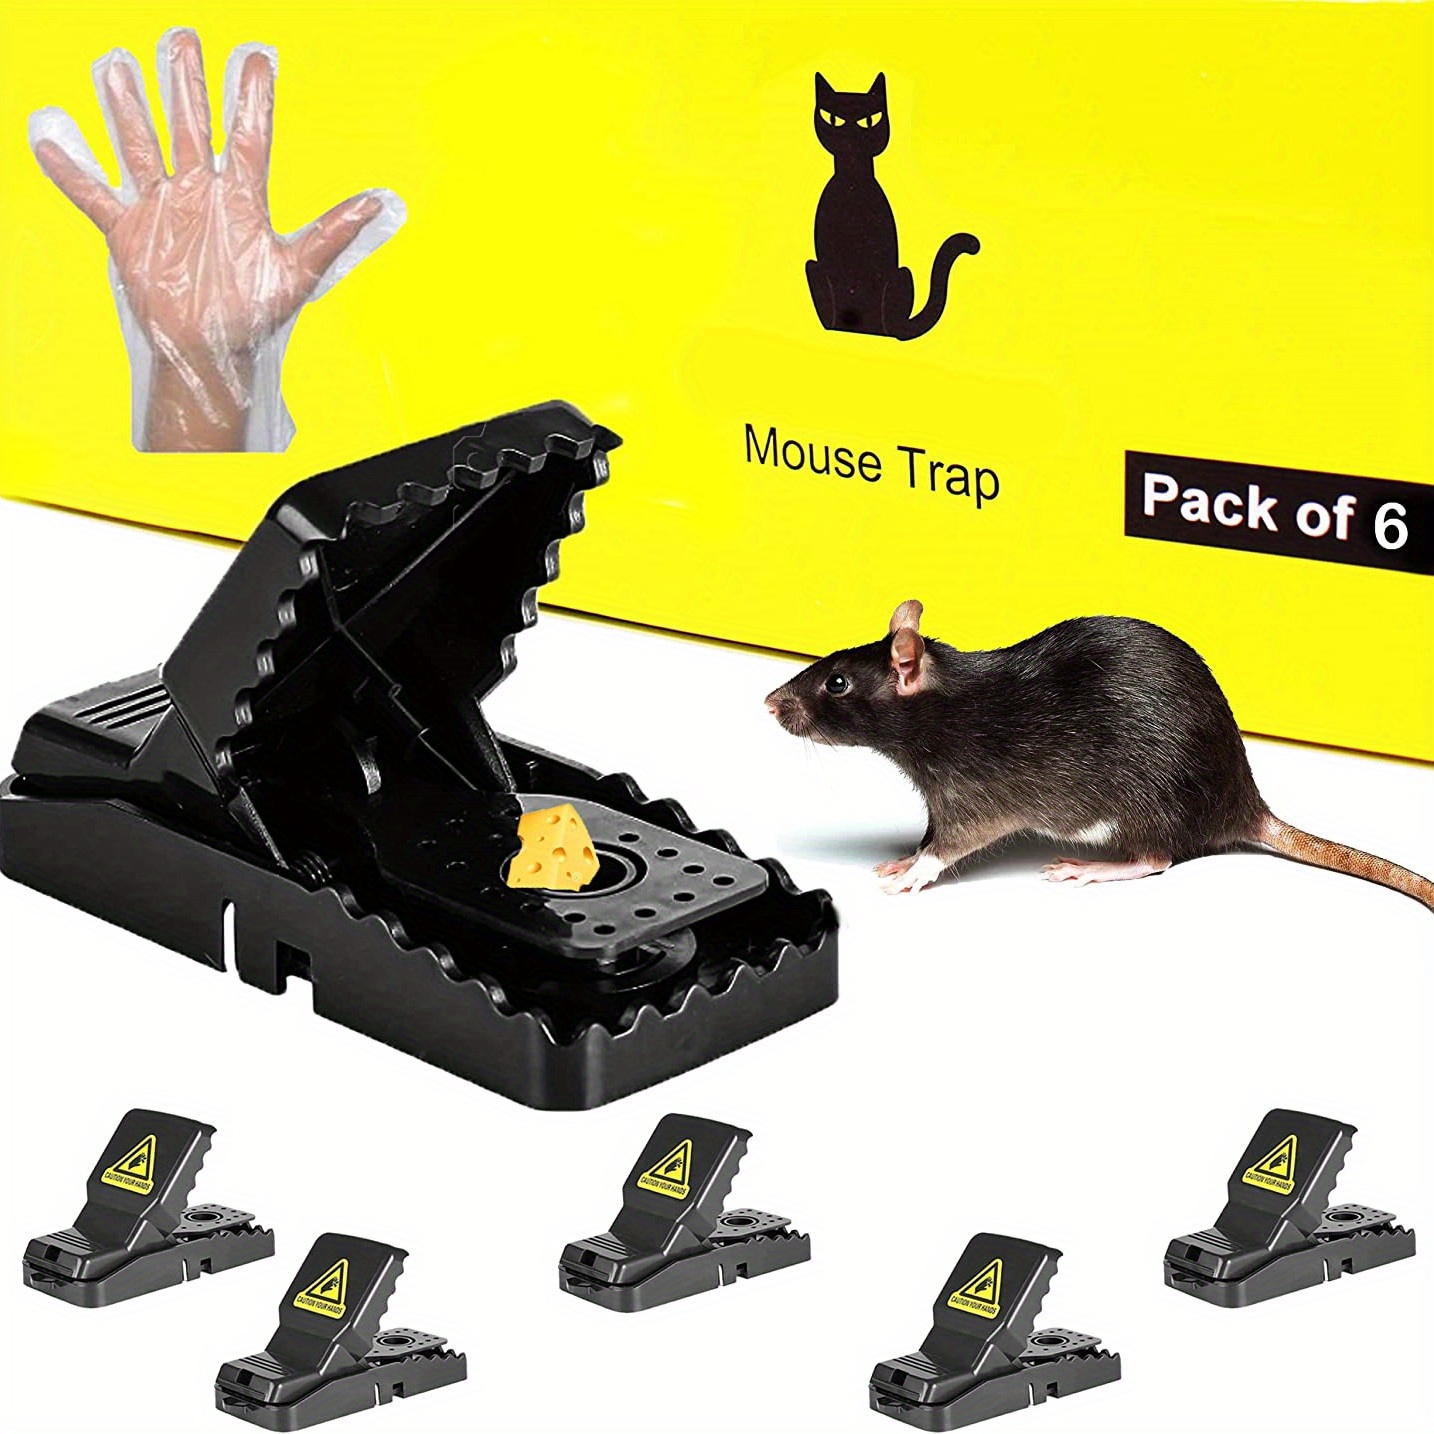 Humane Mouse Traps Indoor for Home - No Kill Mouse Traps - Catch and  Release - Safe for Children & Pets